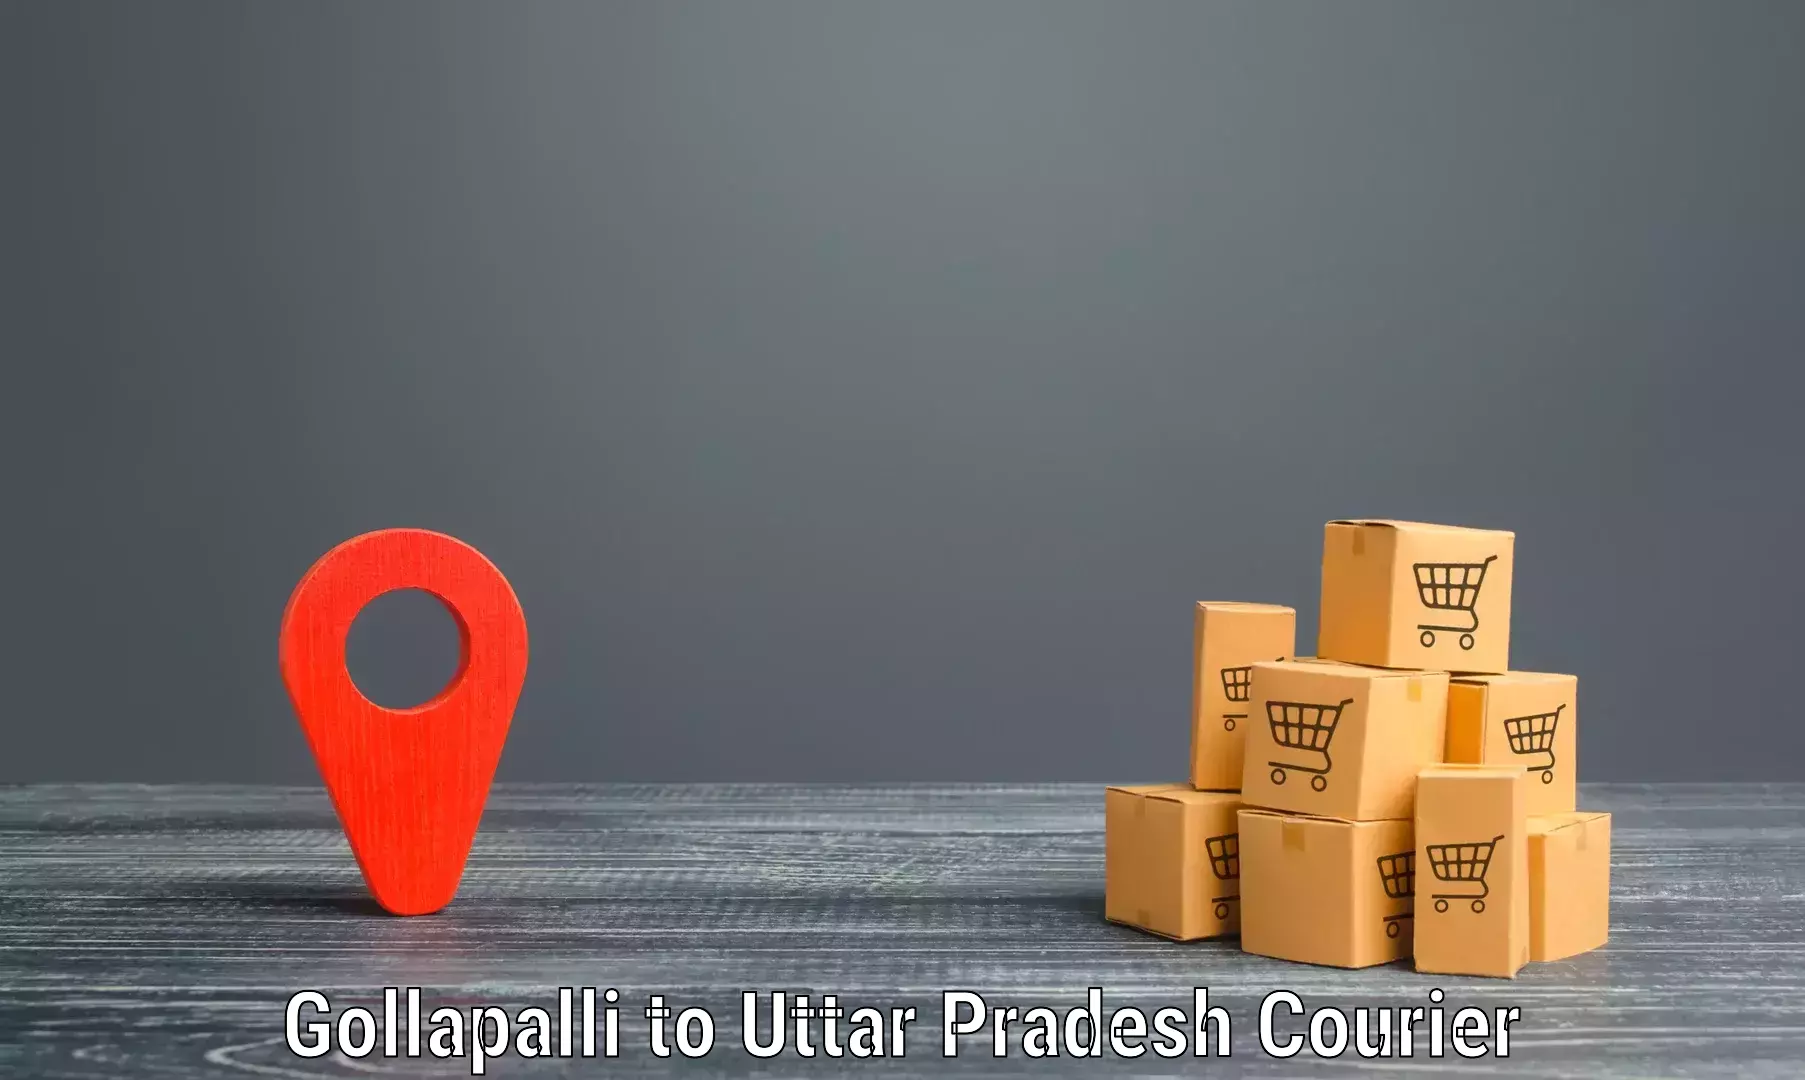 Trackable shipping service Gollapalli to Pilibhit